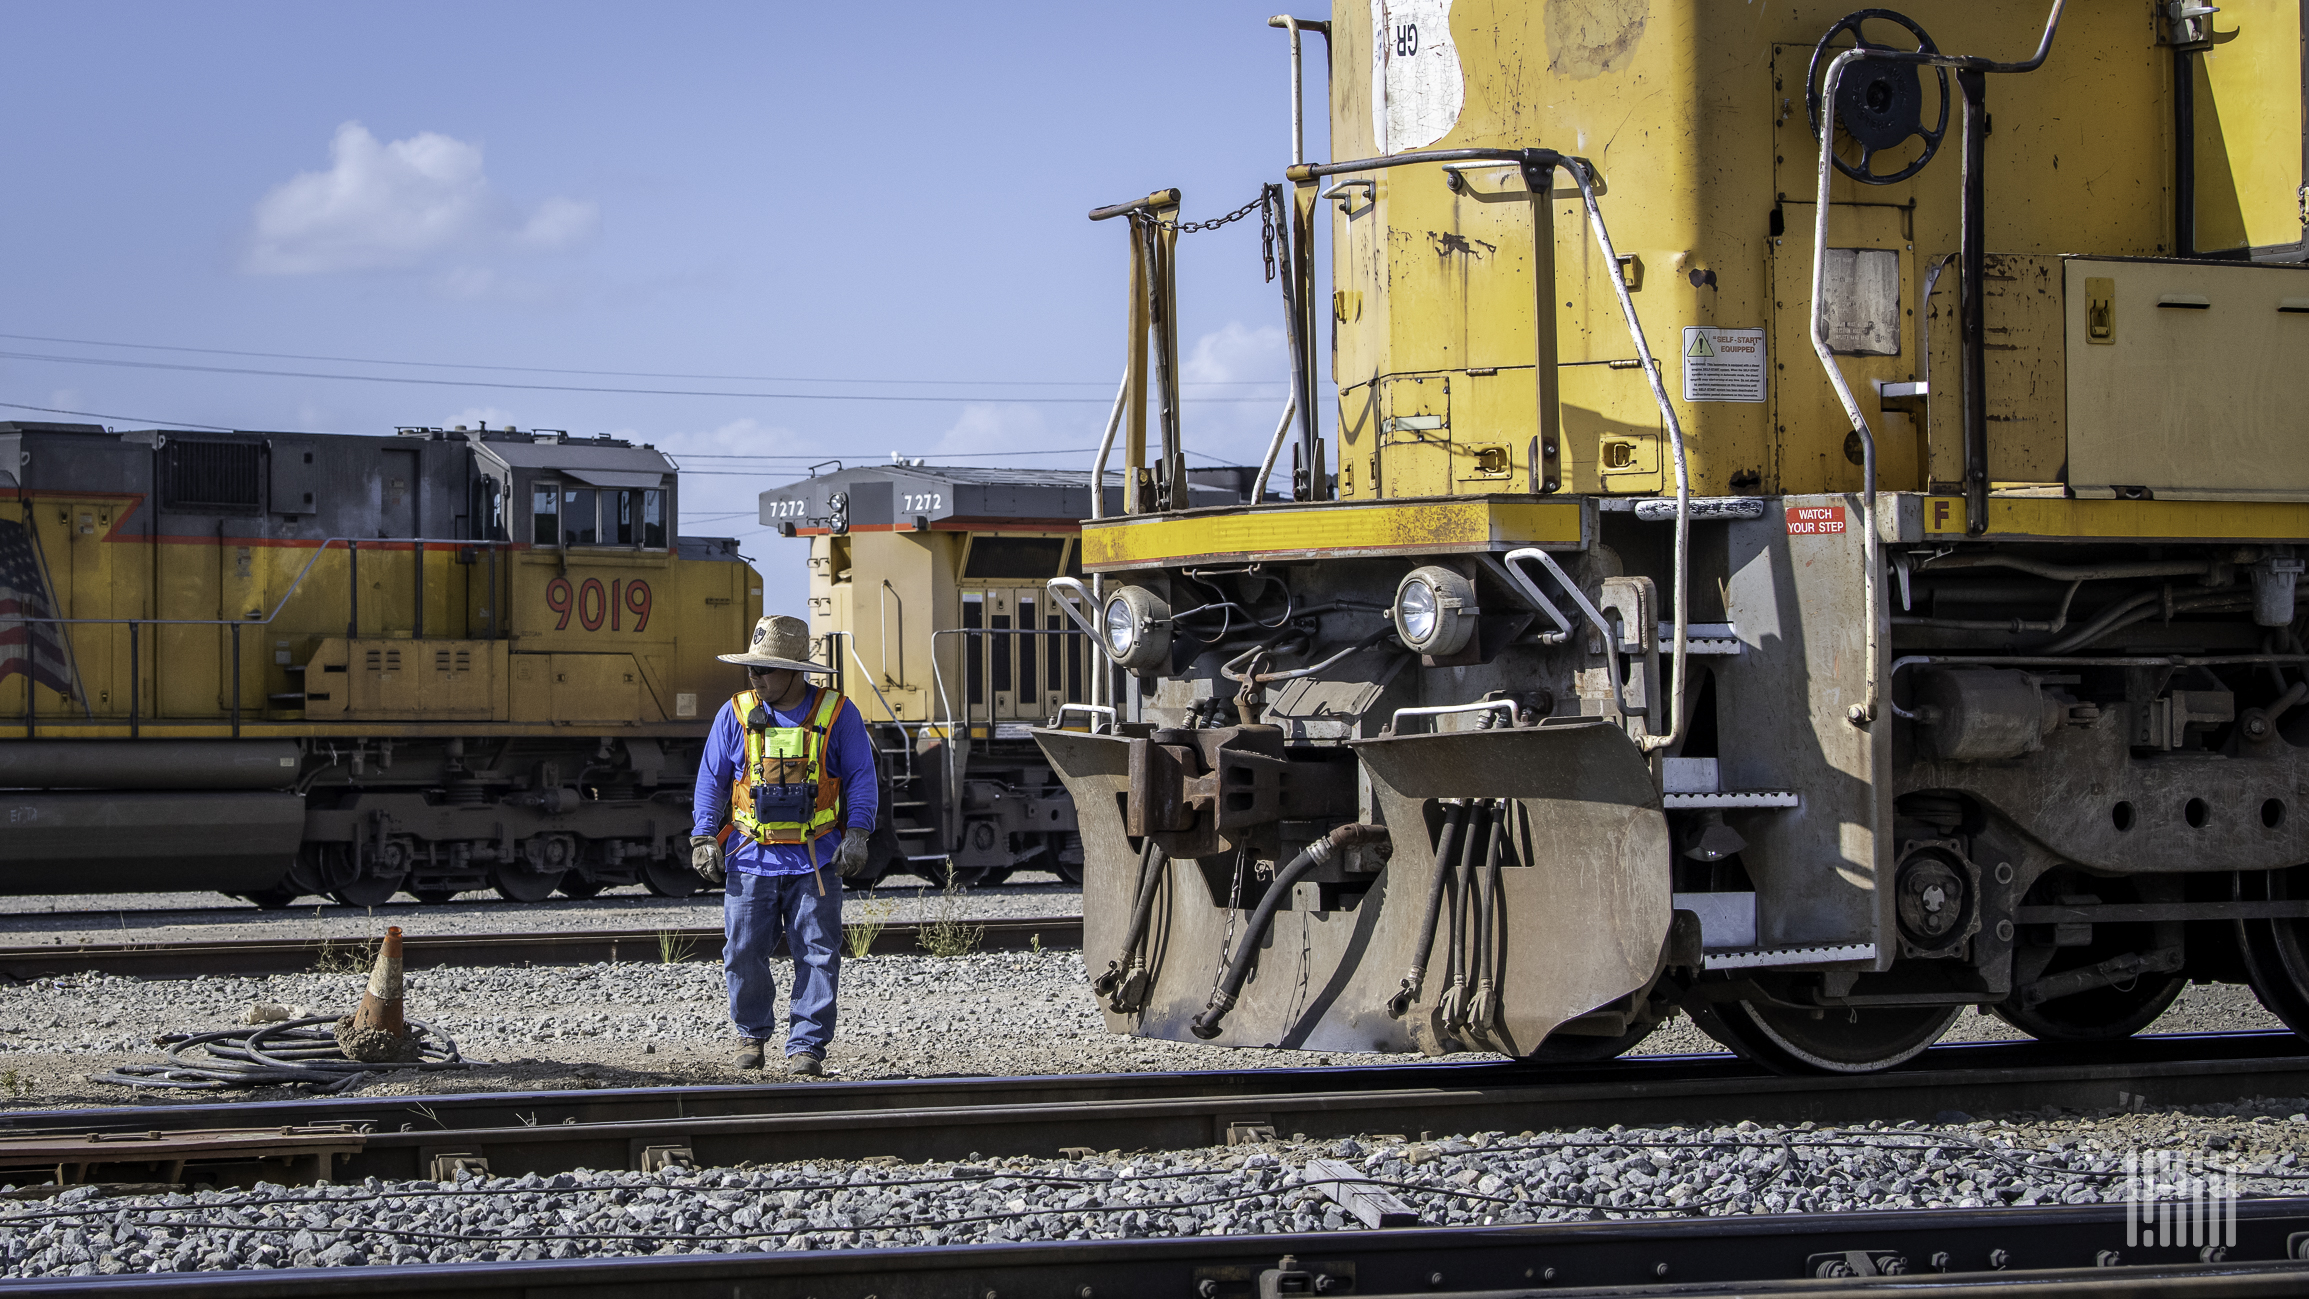 A photograph of a man walking by a locomotive in a rail yard.